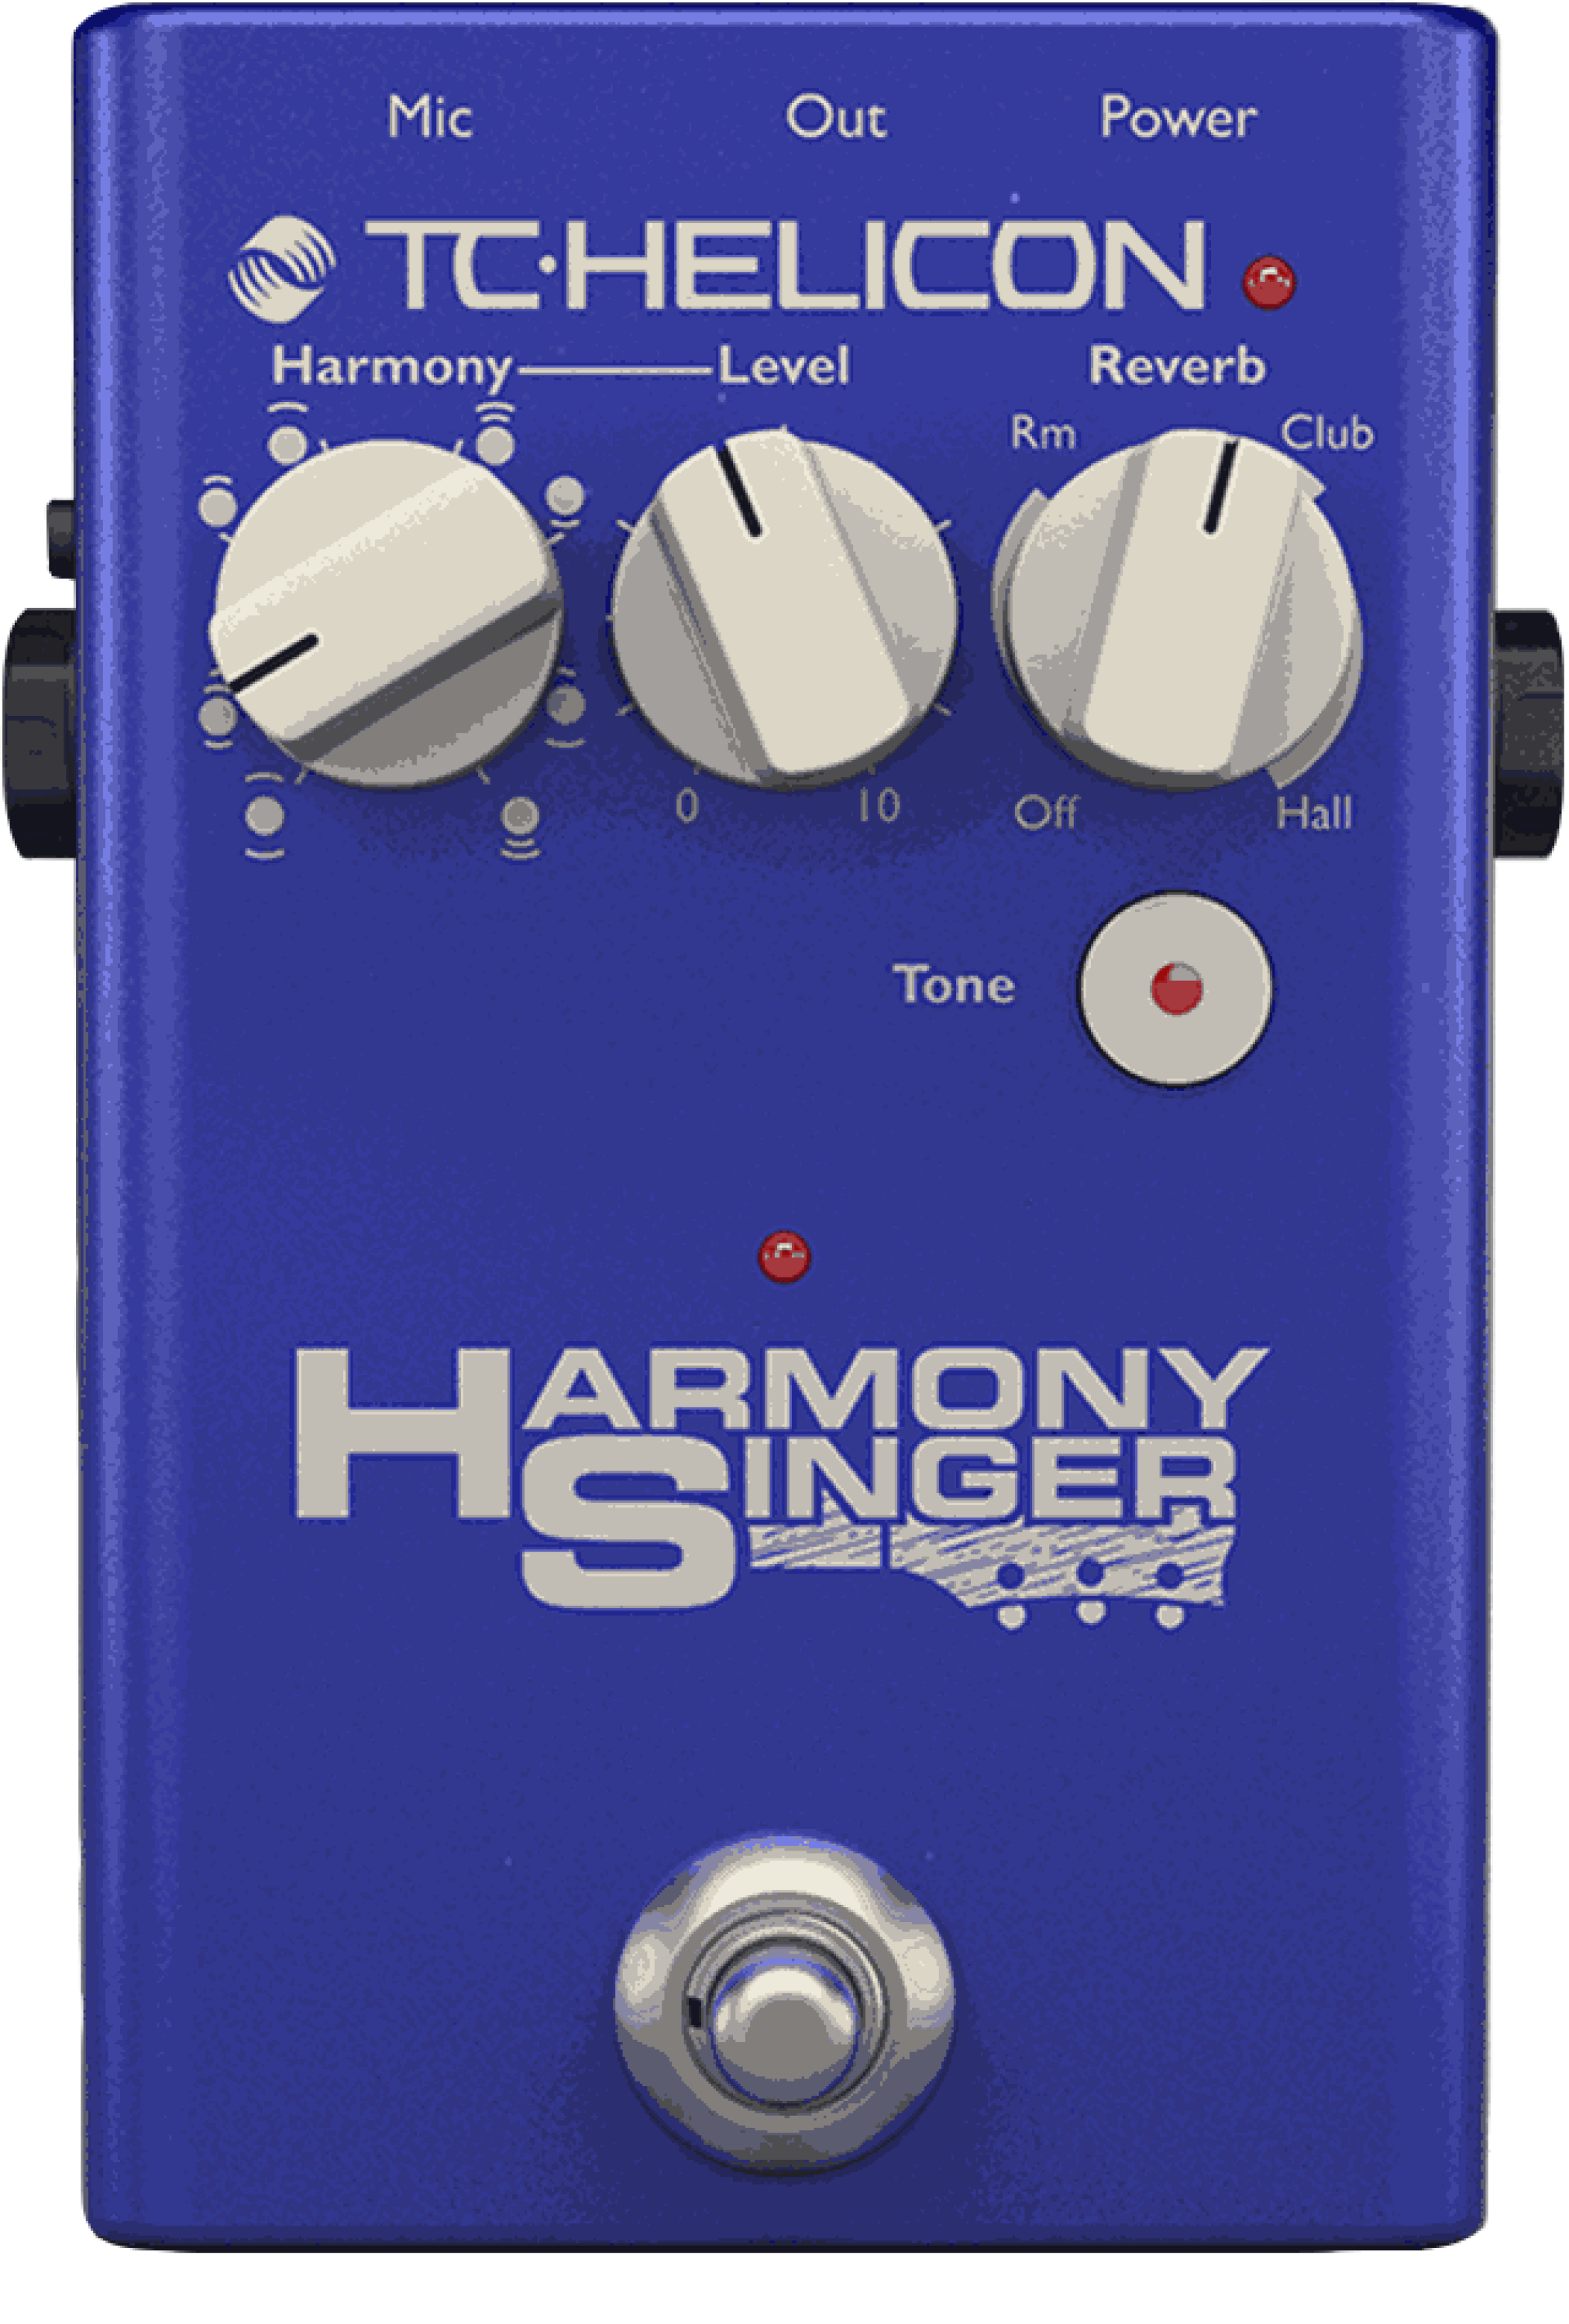 Bundled Item: TC-Helicon Harmony Singer 2 Vocal Harmony and Reverb Pedal